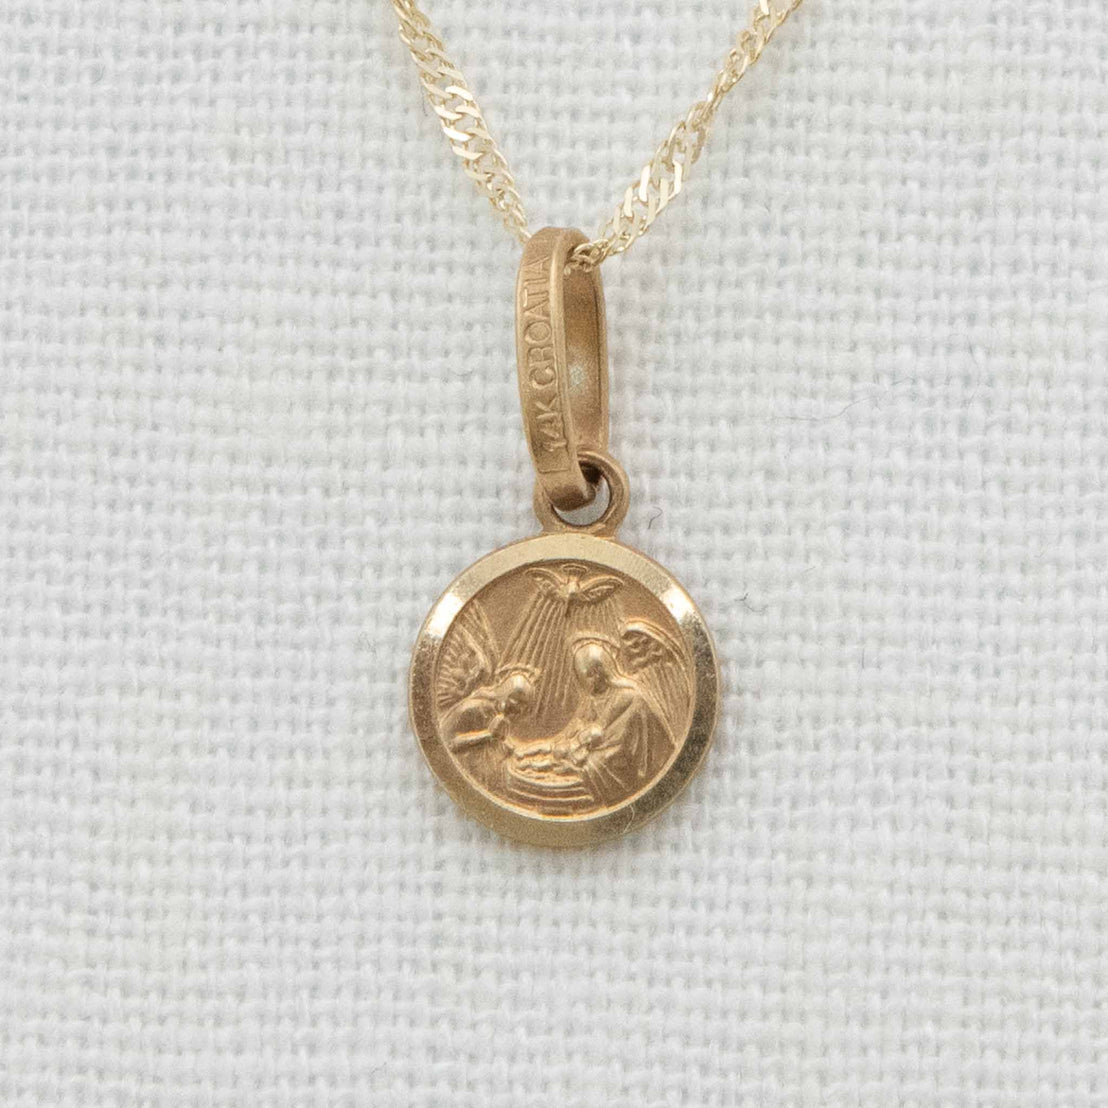 Solid gold round charm with chain depicting baby blessing